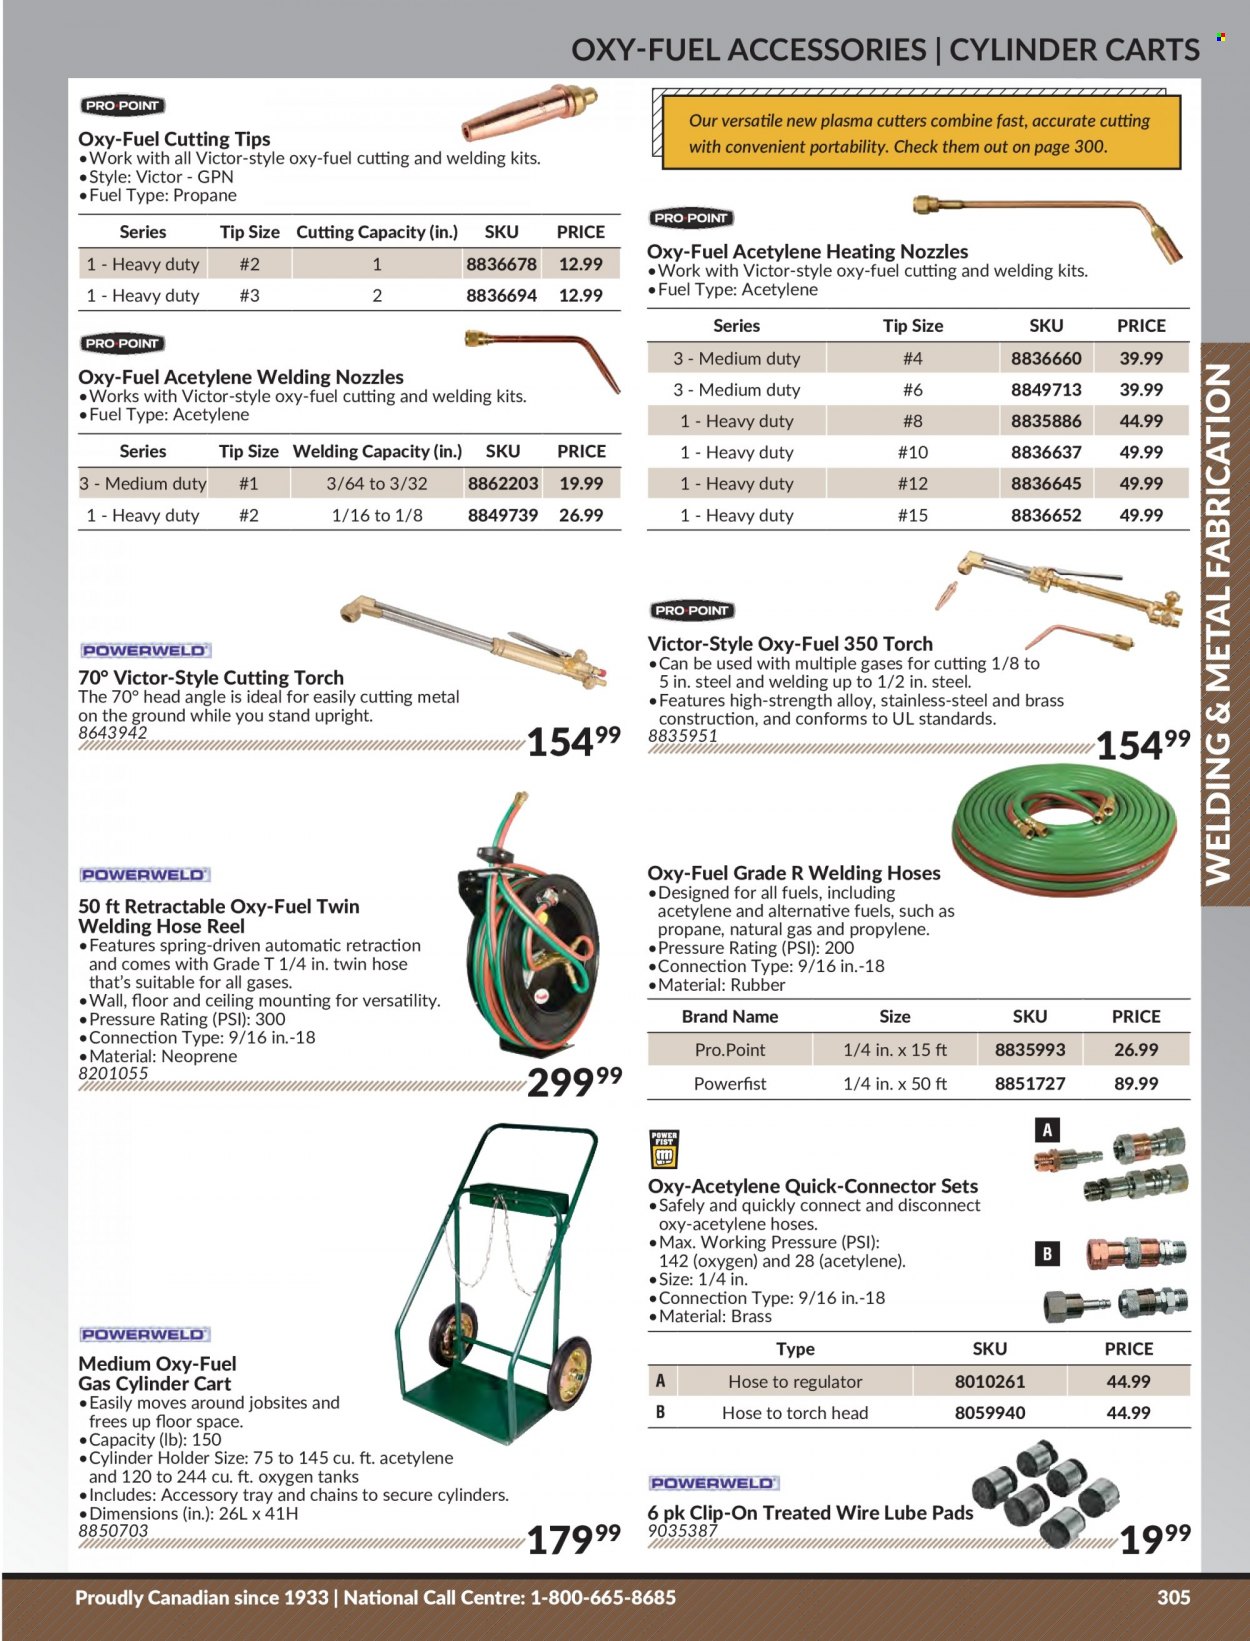 Princess Auto Flyer - Sales products - holder, tank, cart, gas cylinder, hose reel. Page 313.